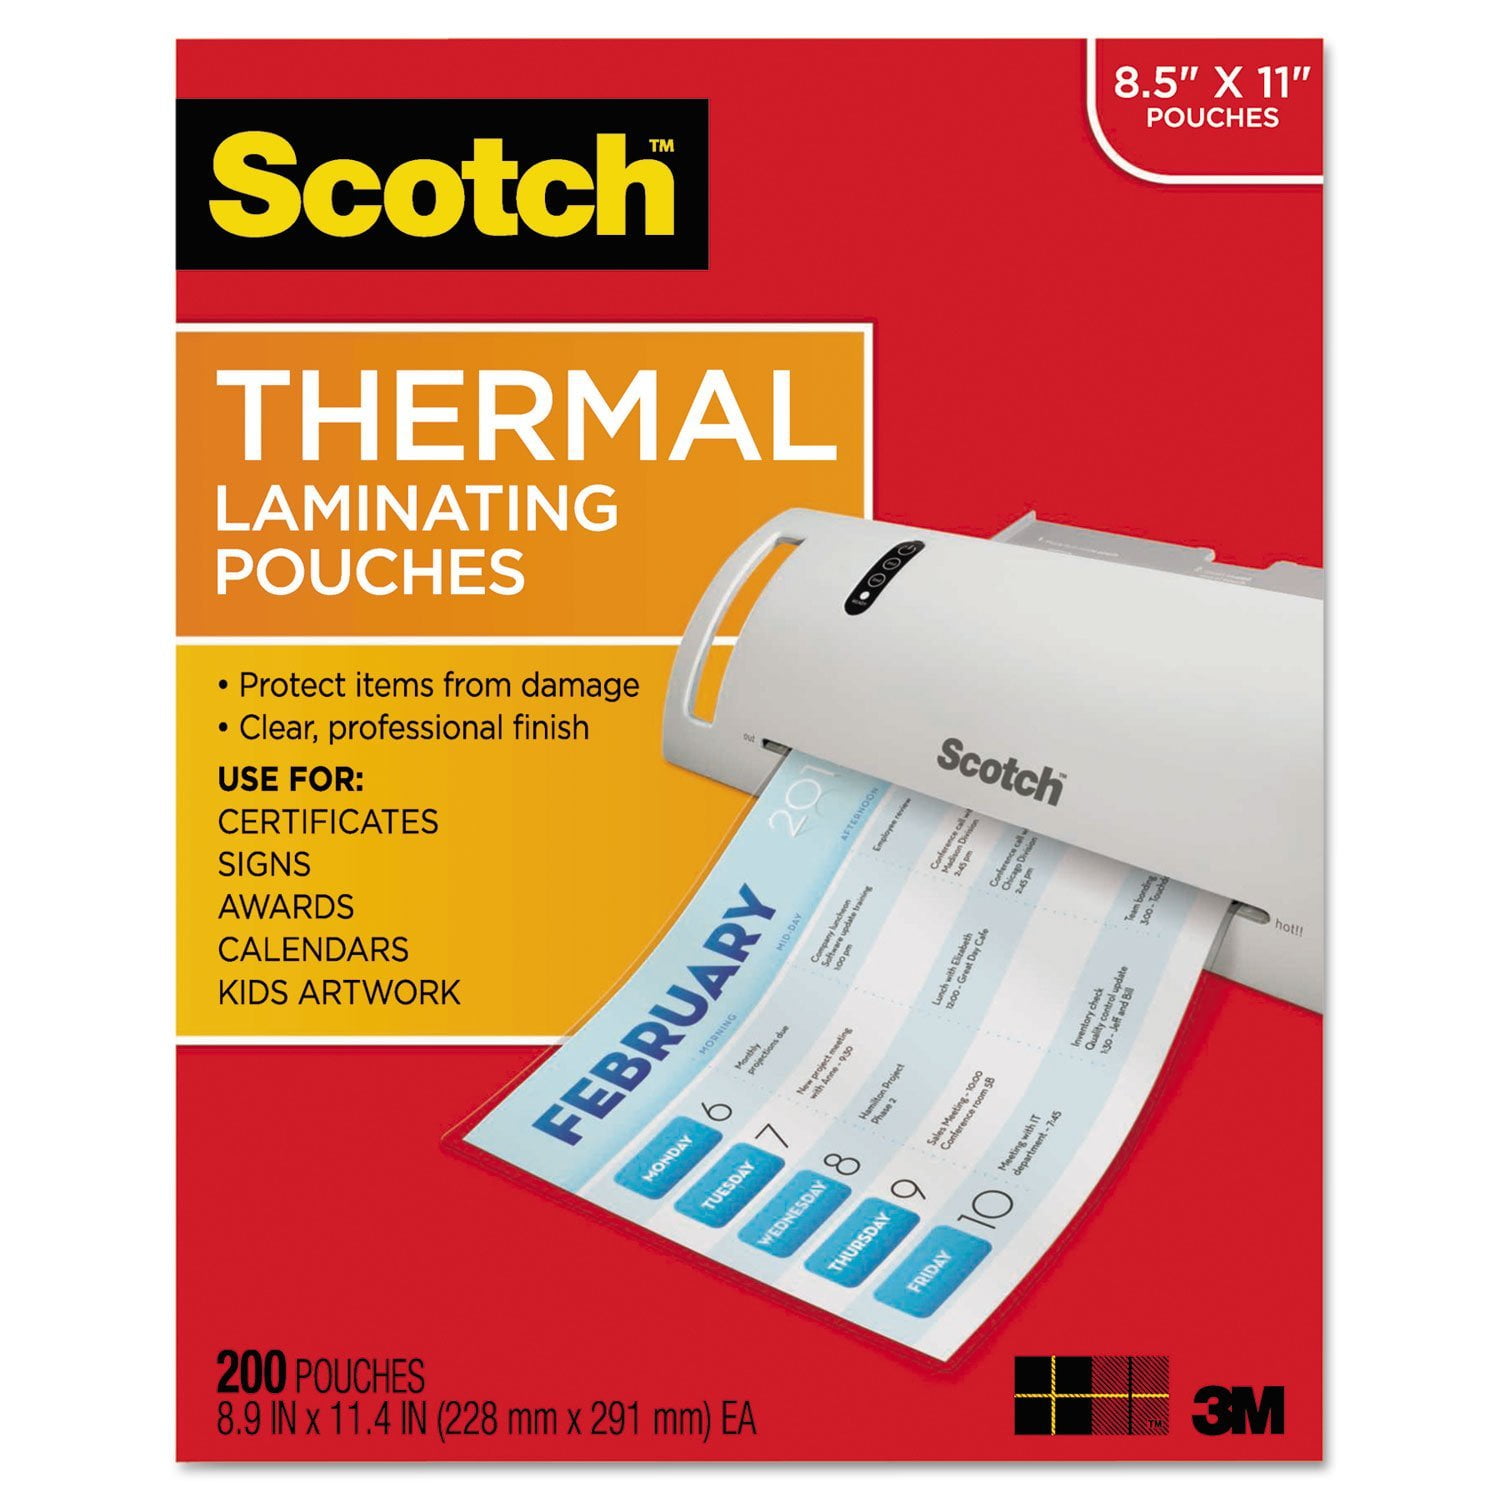 PK 100 A5 Laminating Pouches Film 150 Micron Gloss -Buy 2 packs get $5 off